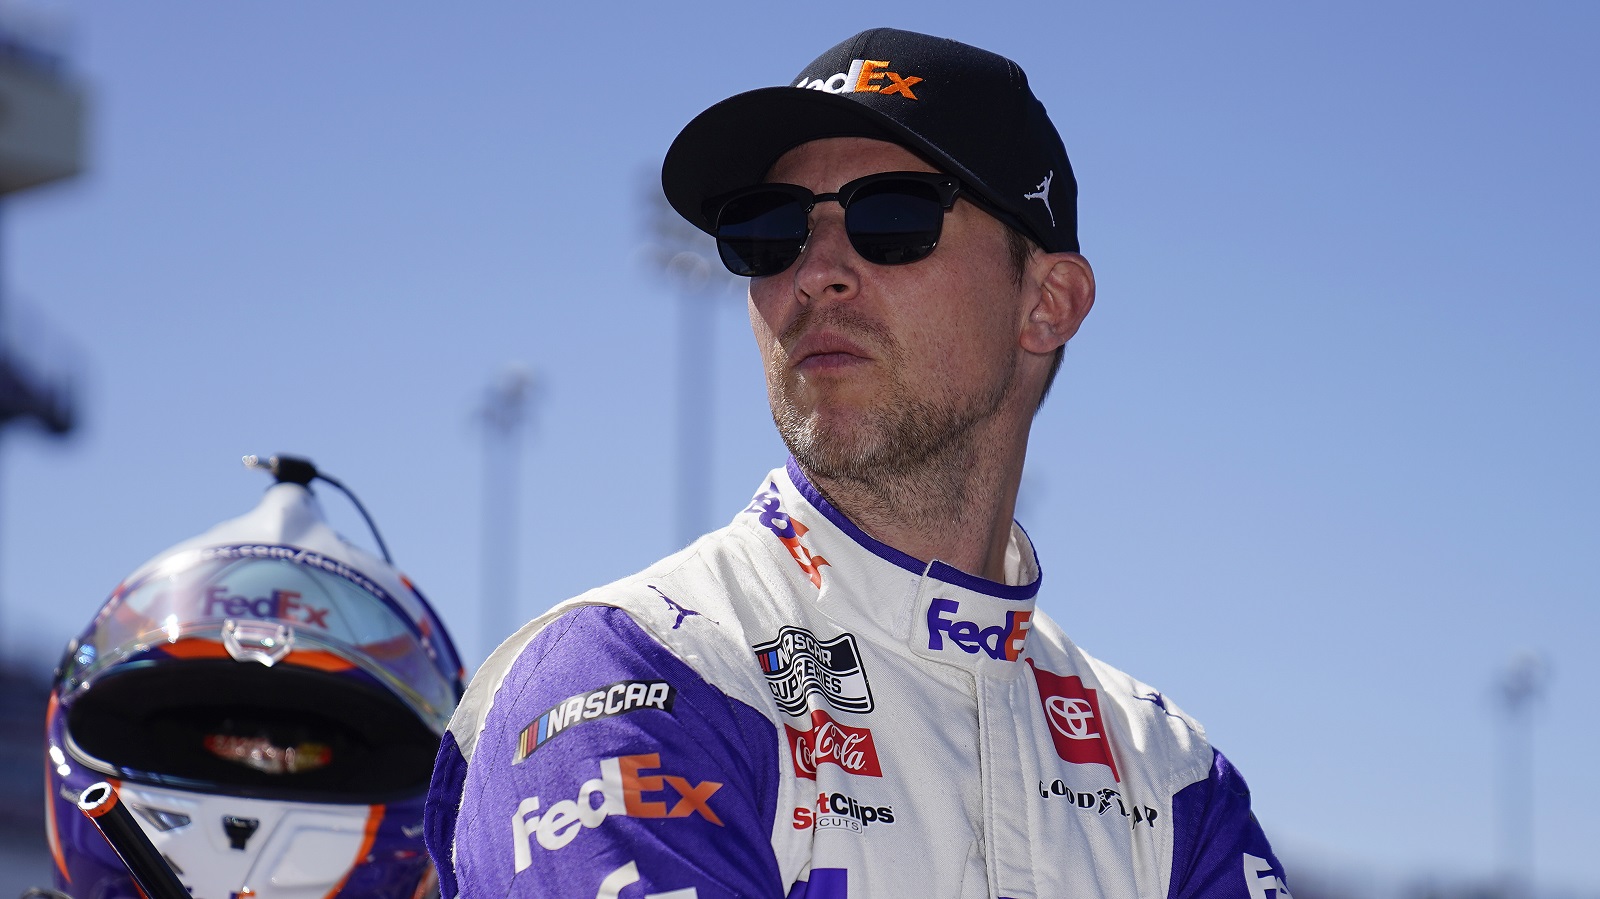 Denny Hamlin looks on during qualifying for the NASCAR Cup Series Toyota Owners 400 at Richmond Raceway on April 2, 2022.